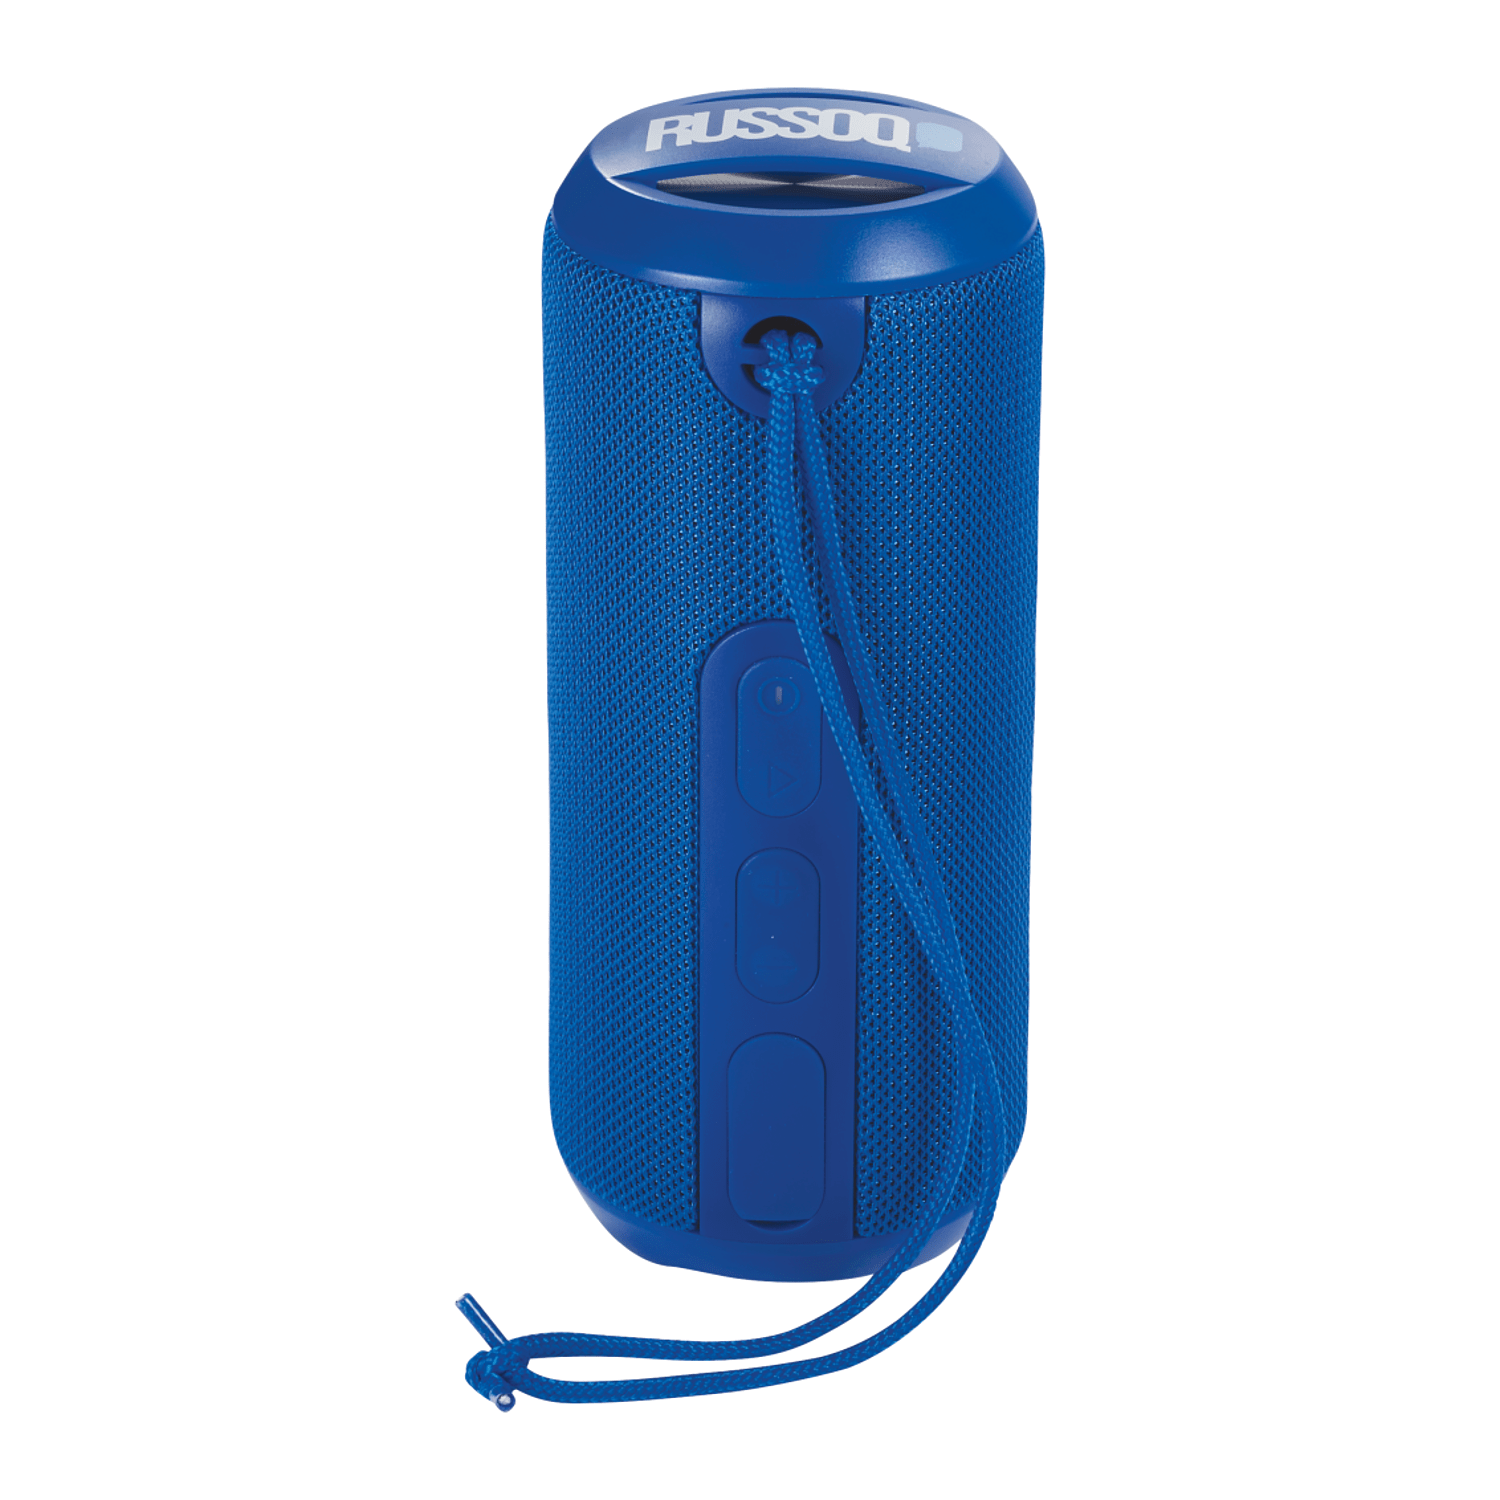 Threadfellows Accessories One Size / Royal Rugged Fabric Outdoor Waterproof Bluetooth Speaker